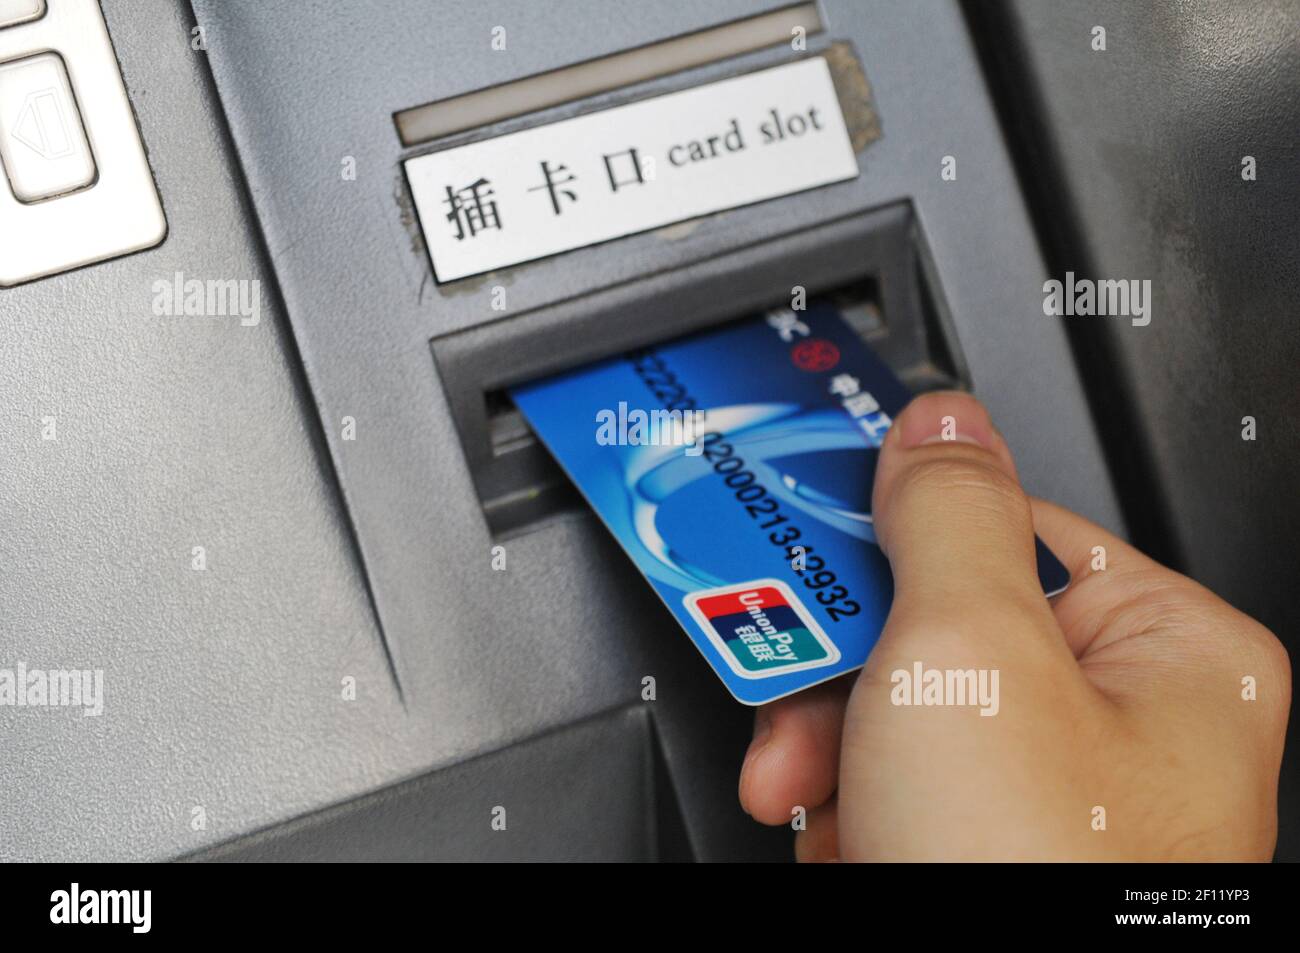 Union Pay is the only credit card organization and inter bank link in China. (Photo by Raphael Fournier/Sipa USA) Stock Photo